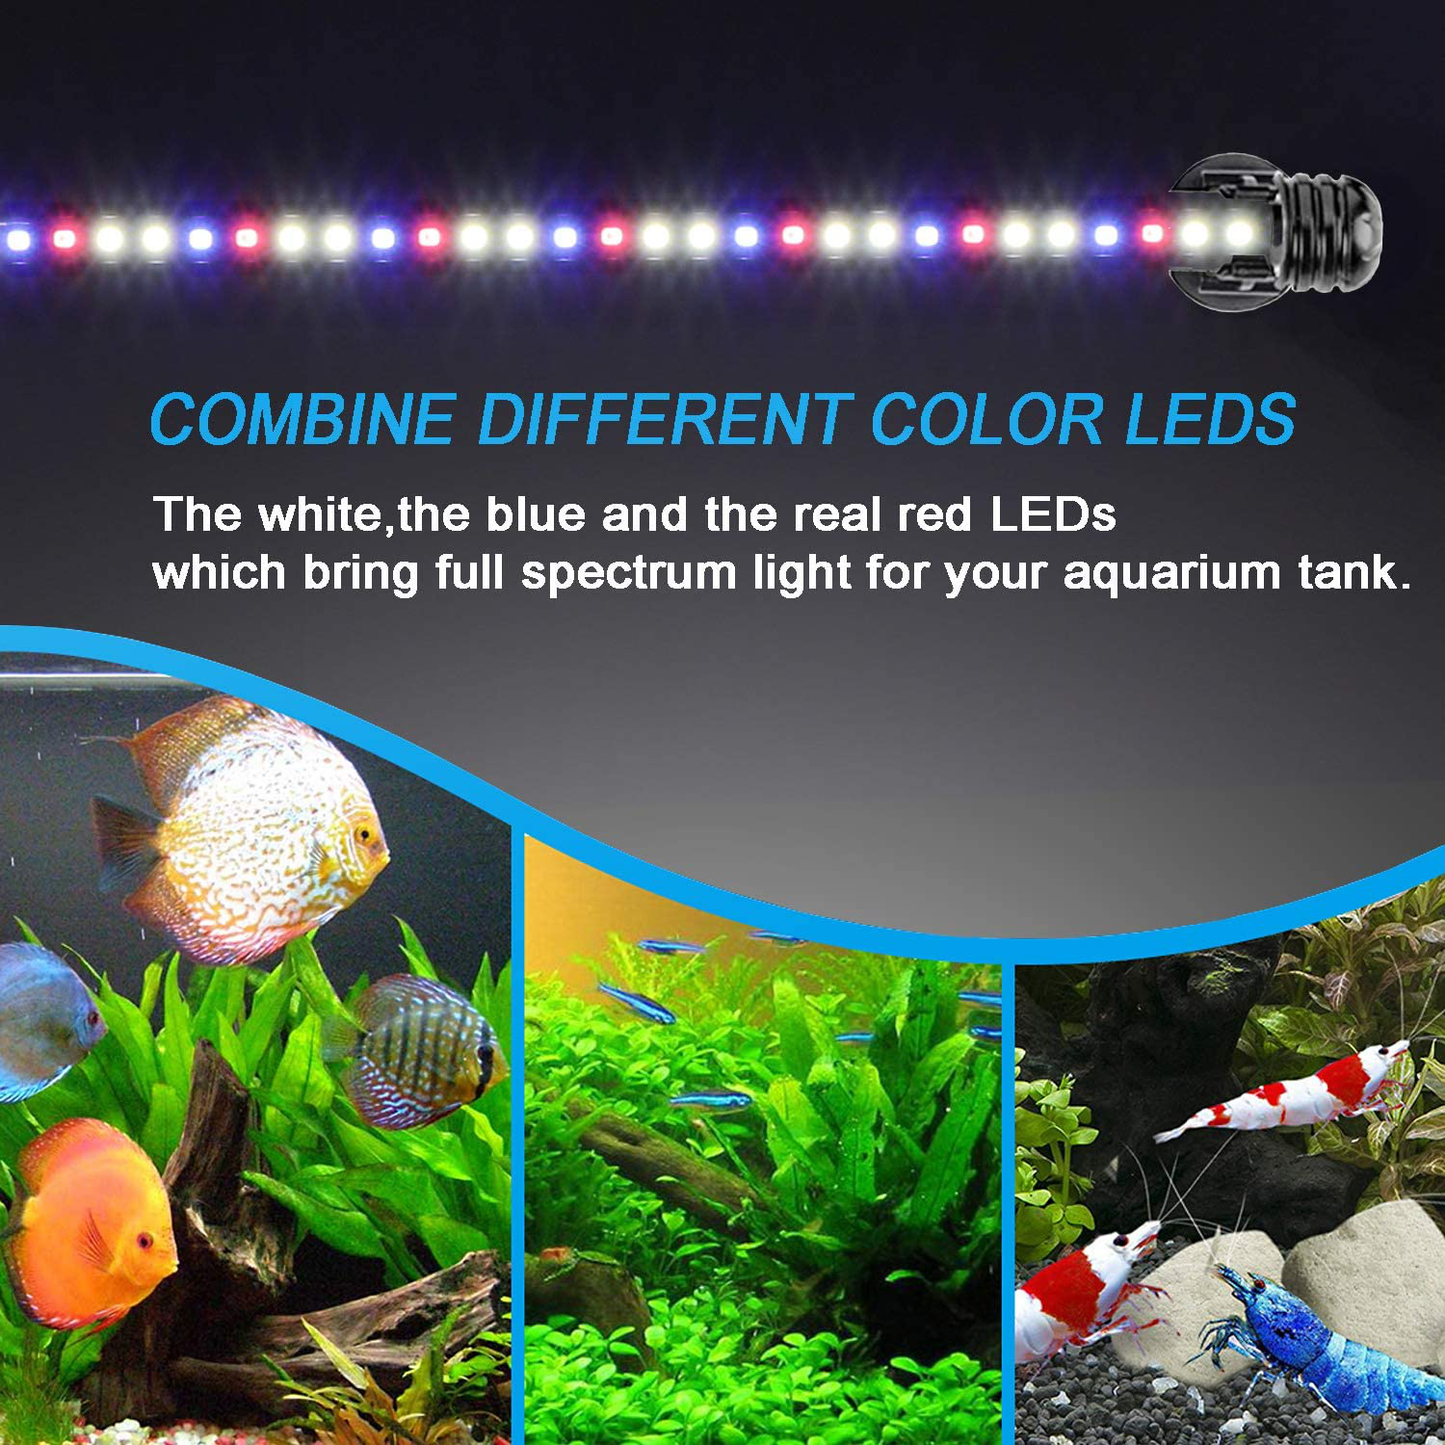 Mingdak 24/7 Submersible Aquarium Light for Fish Tank,Auto Turn On/Off Day/Night Cycle,3 Stage Timer for Timing,3 Lighting Mode,True 660Nm RED Leds,Brightness Adjust,39 Leds 15 Inch